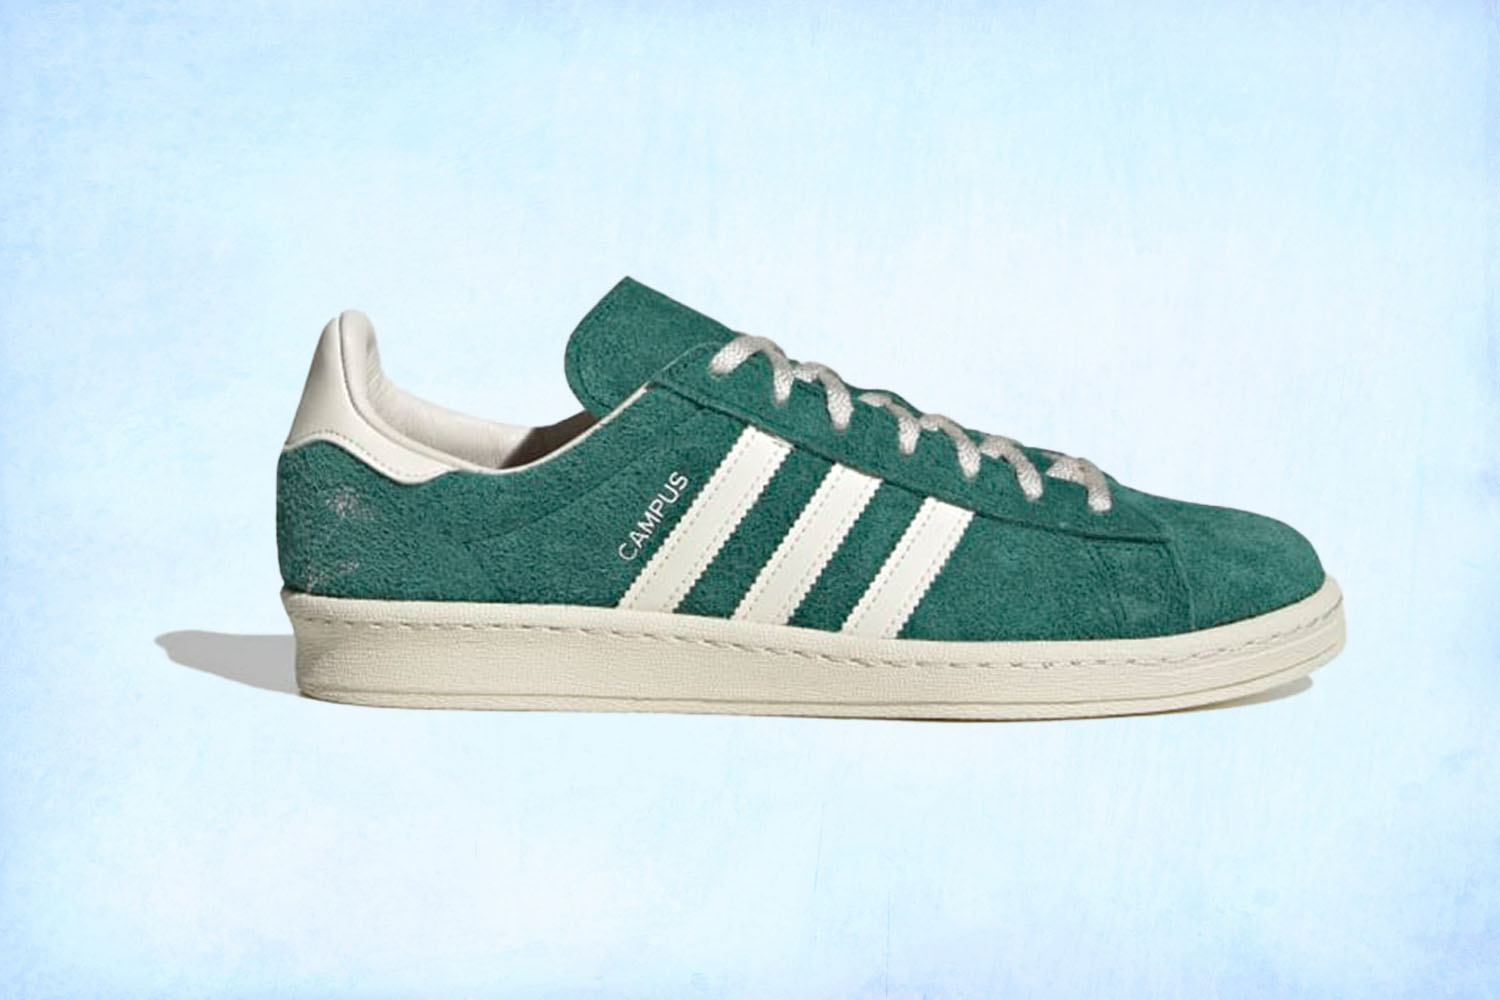 Where can I get Adidas replica shoes in India? - Quora